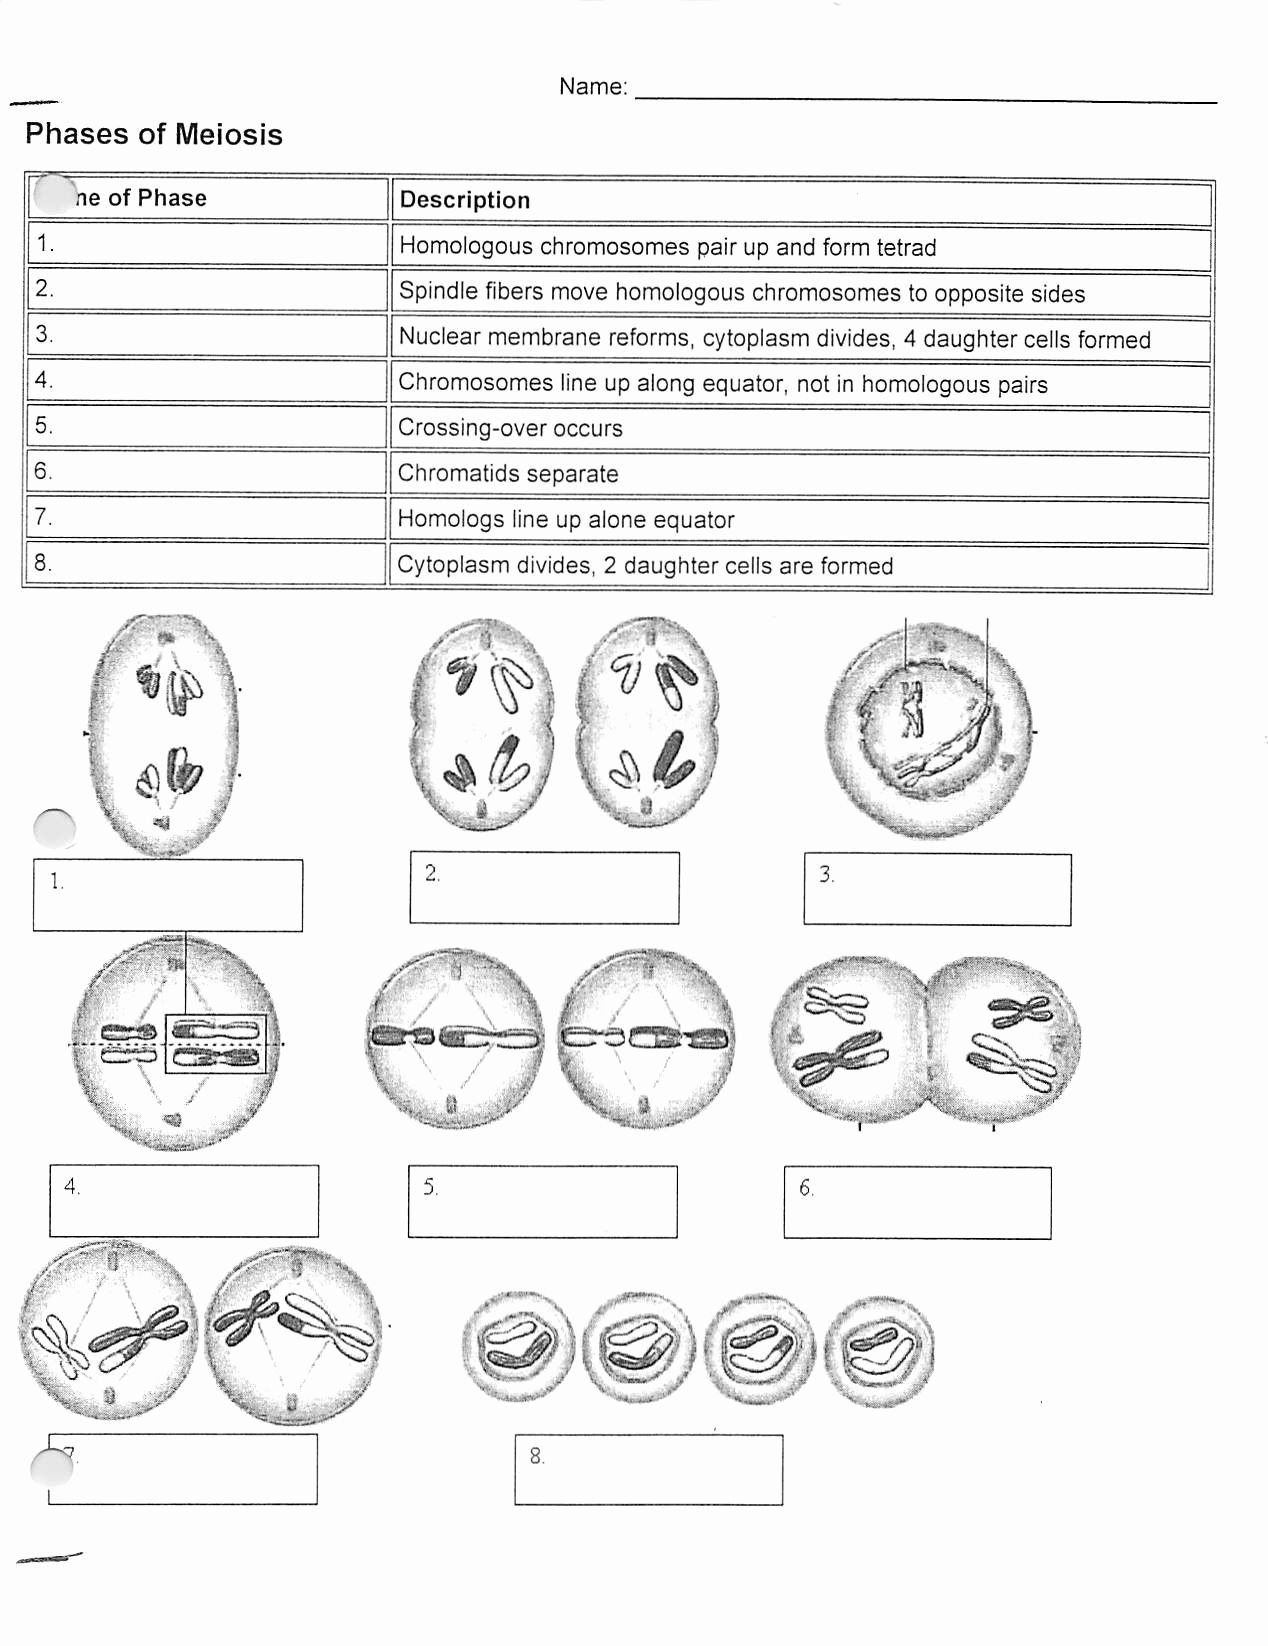 Stages Of Meiosis Worksheet Answers